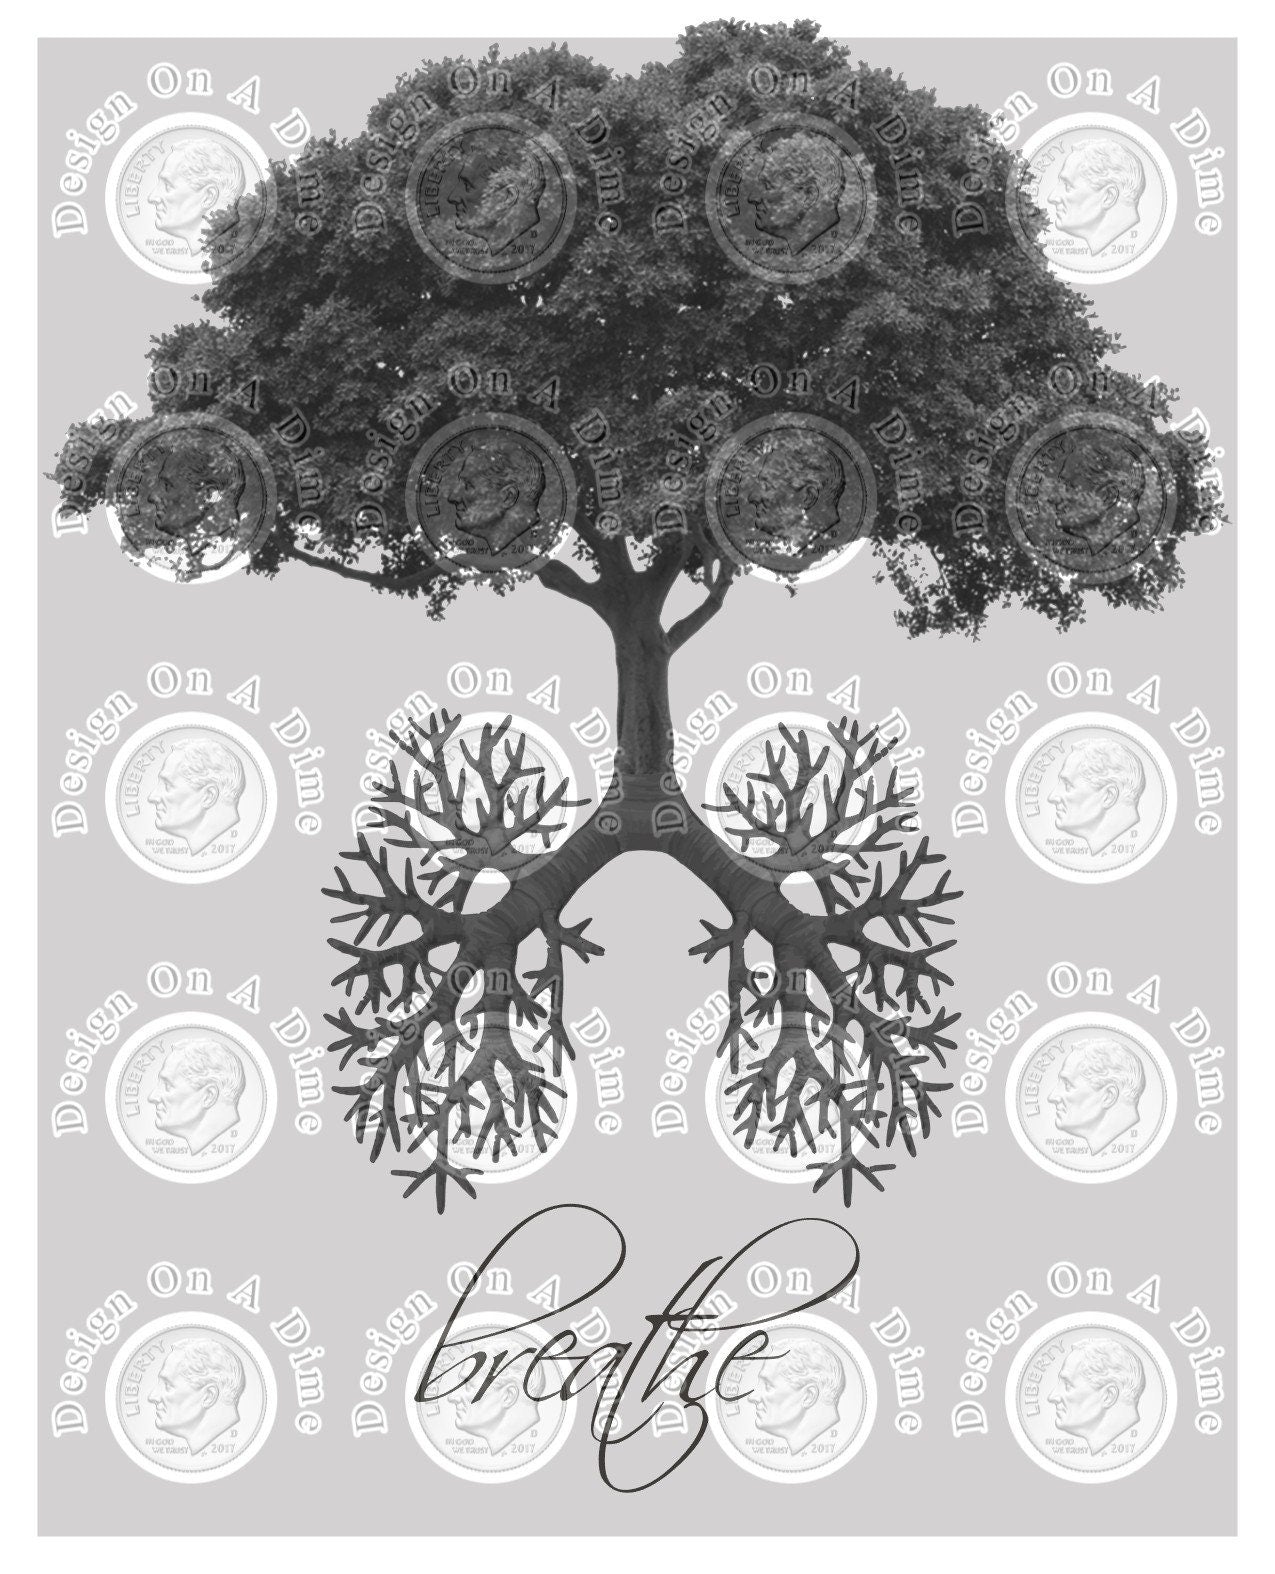 Black and White Breathe File with Tree and Lungs